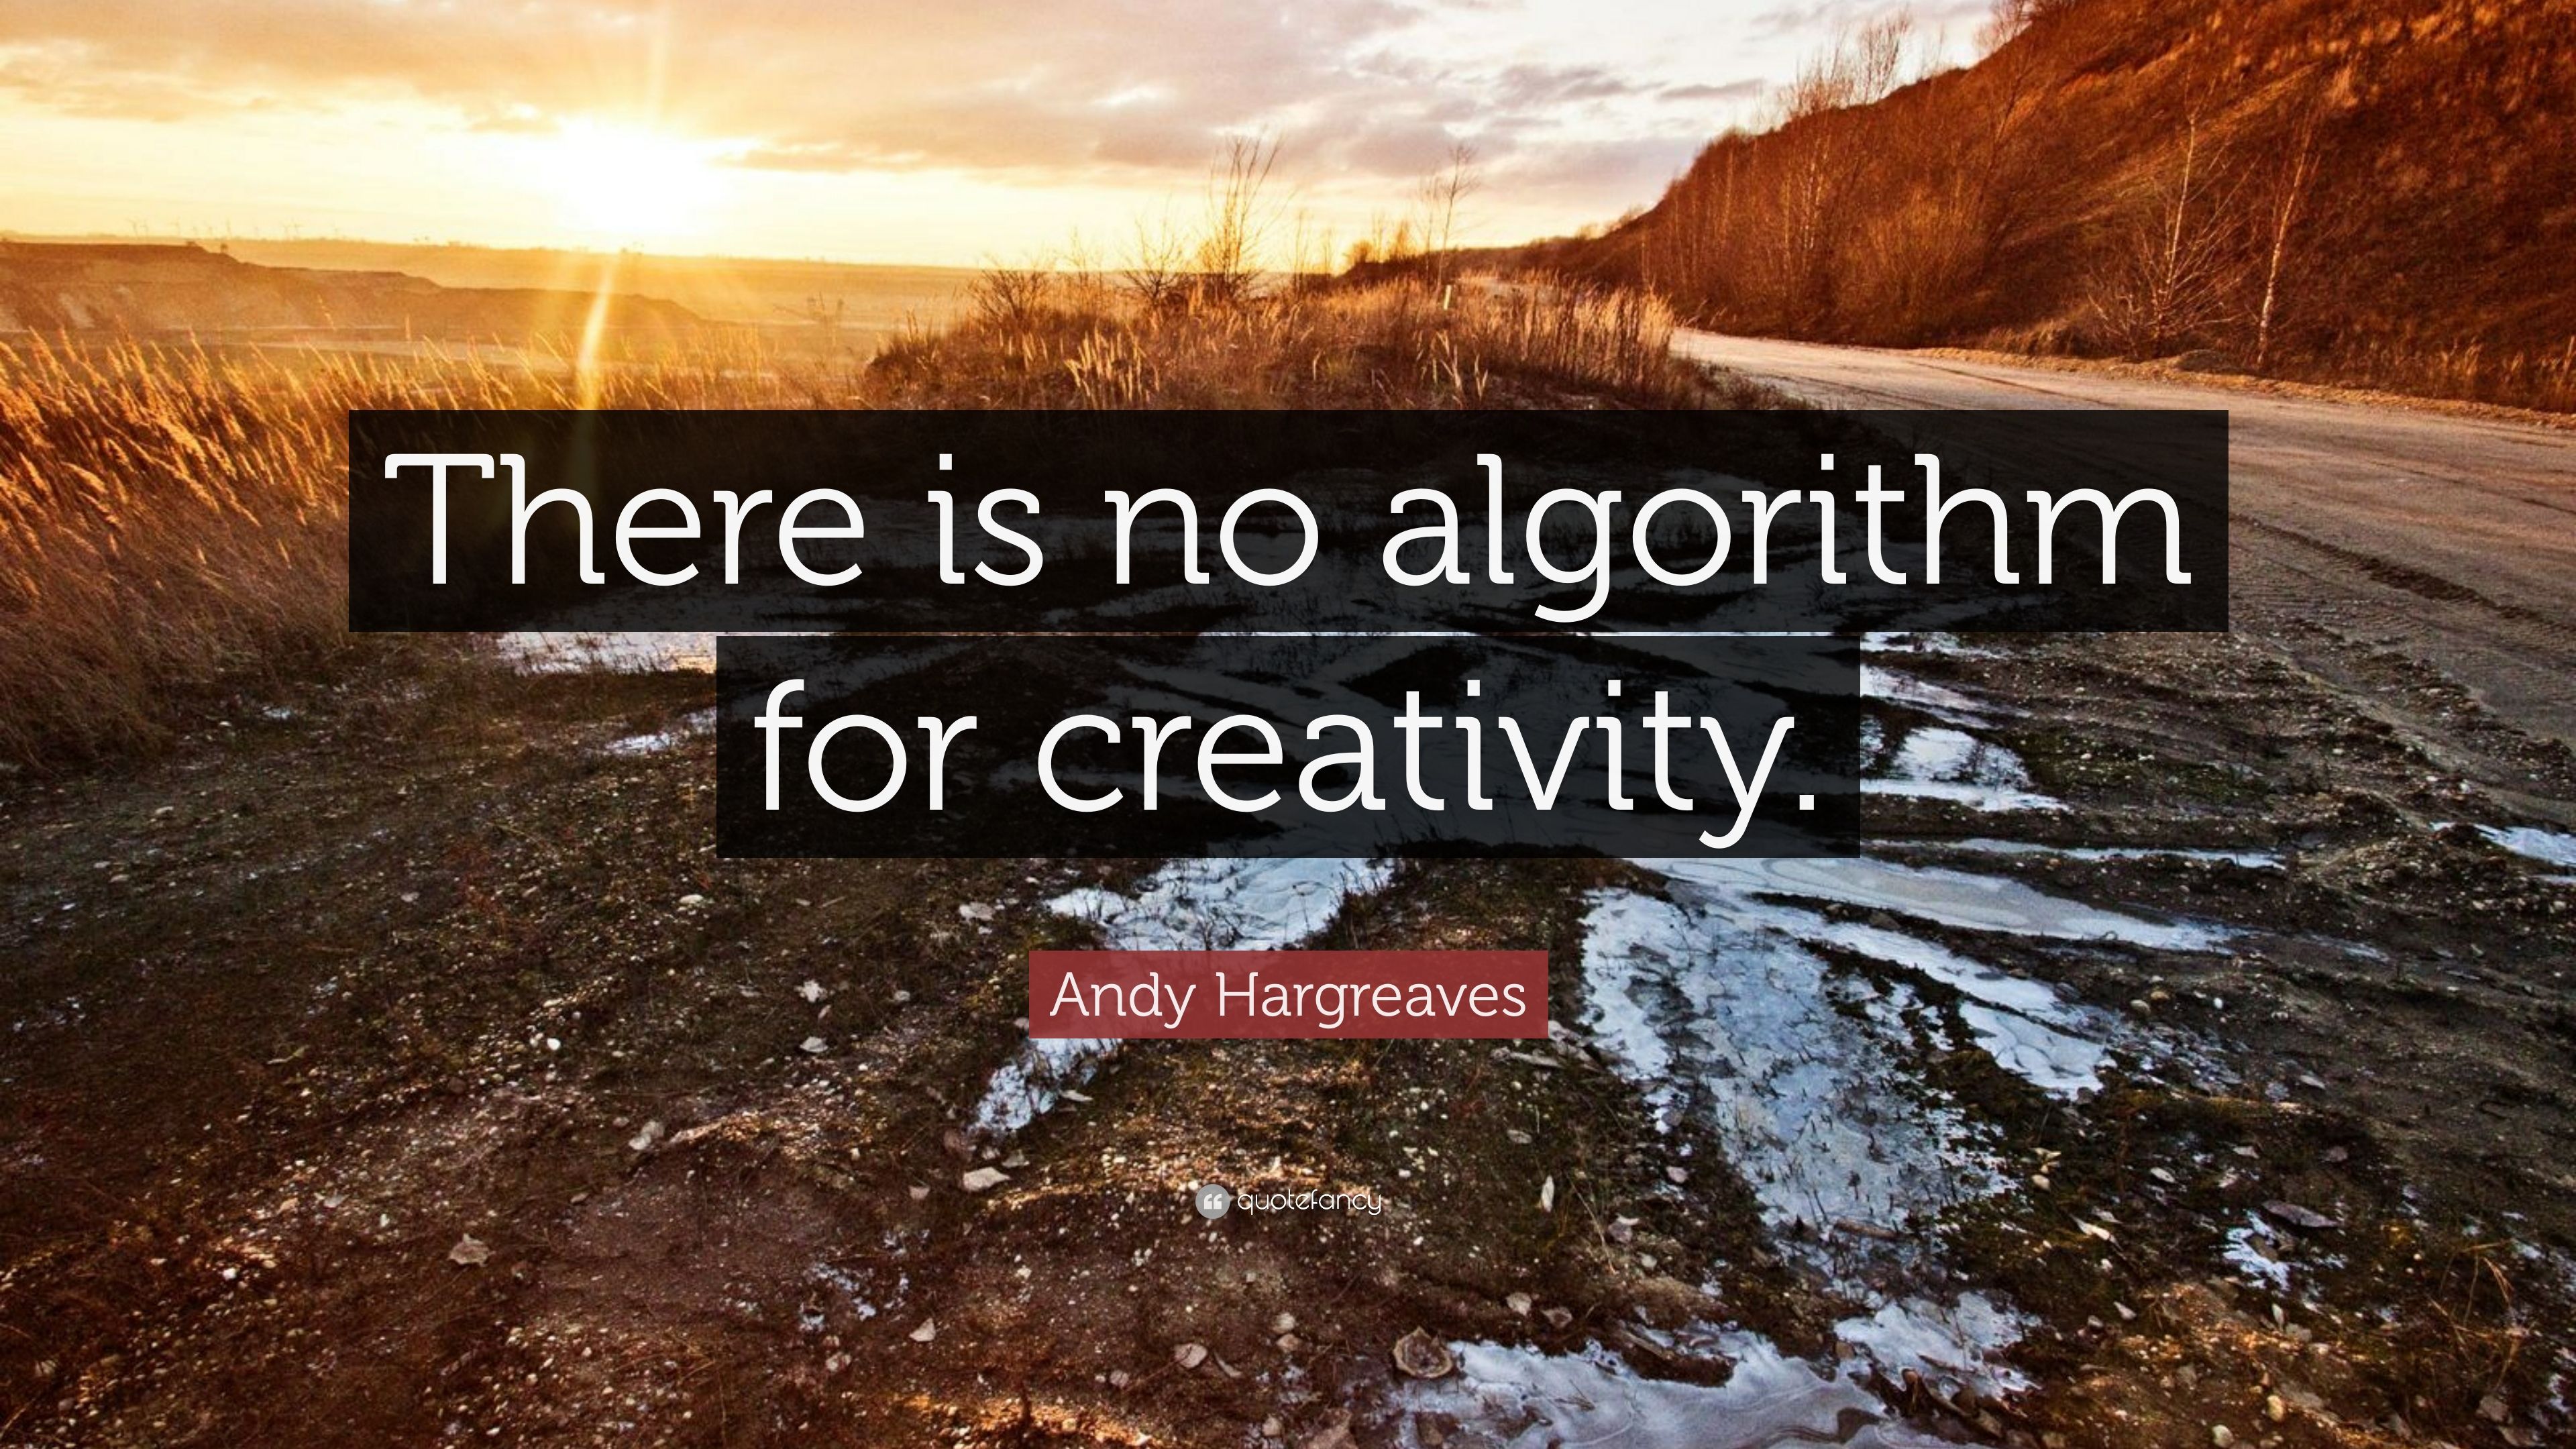 Andy Hargreaves Quote: “There is no algorithm for creativity.” 7